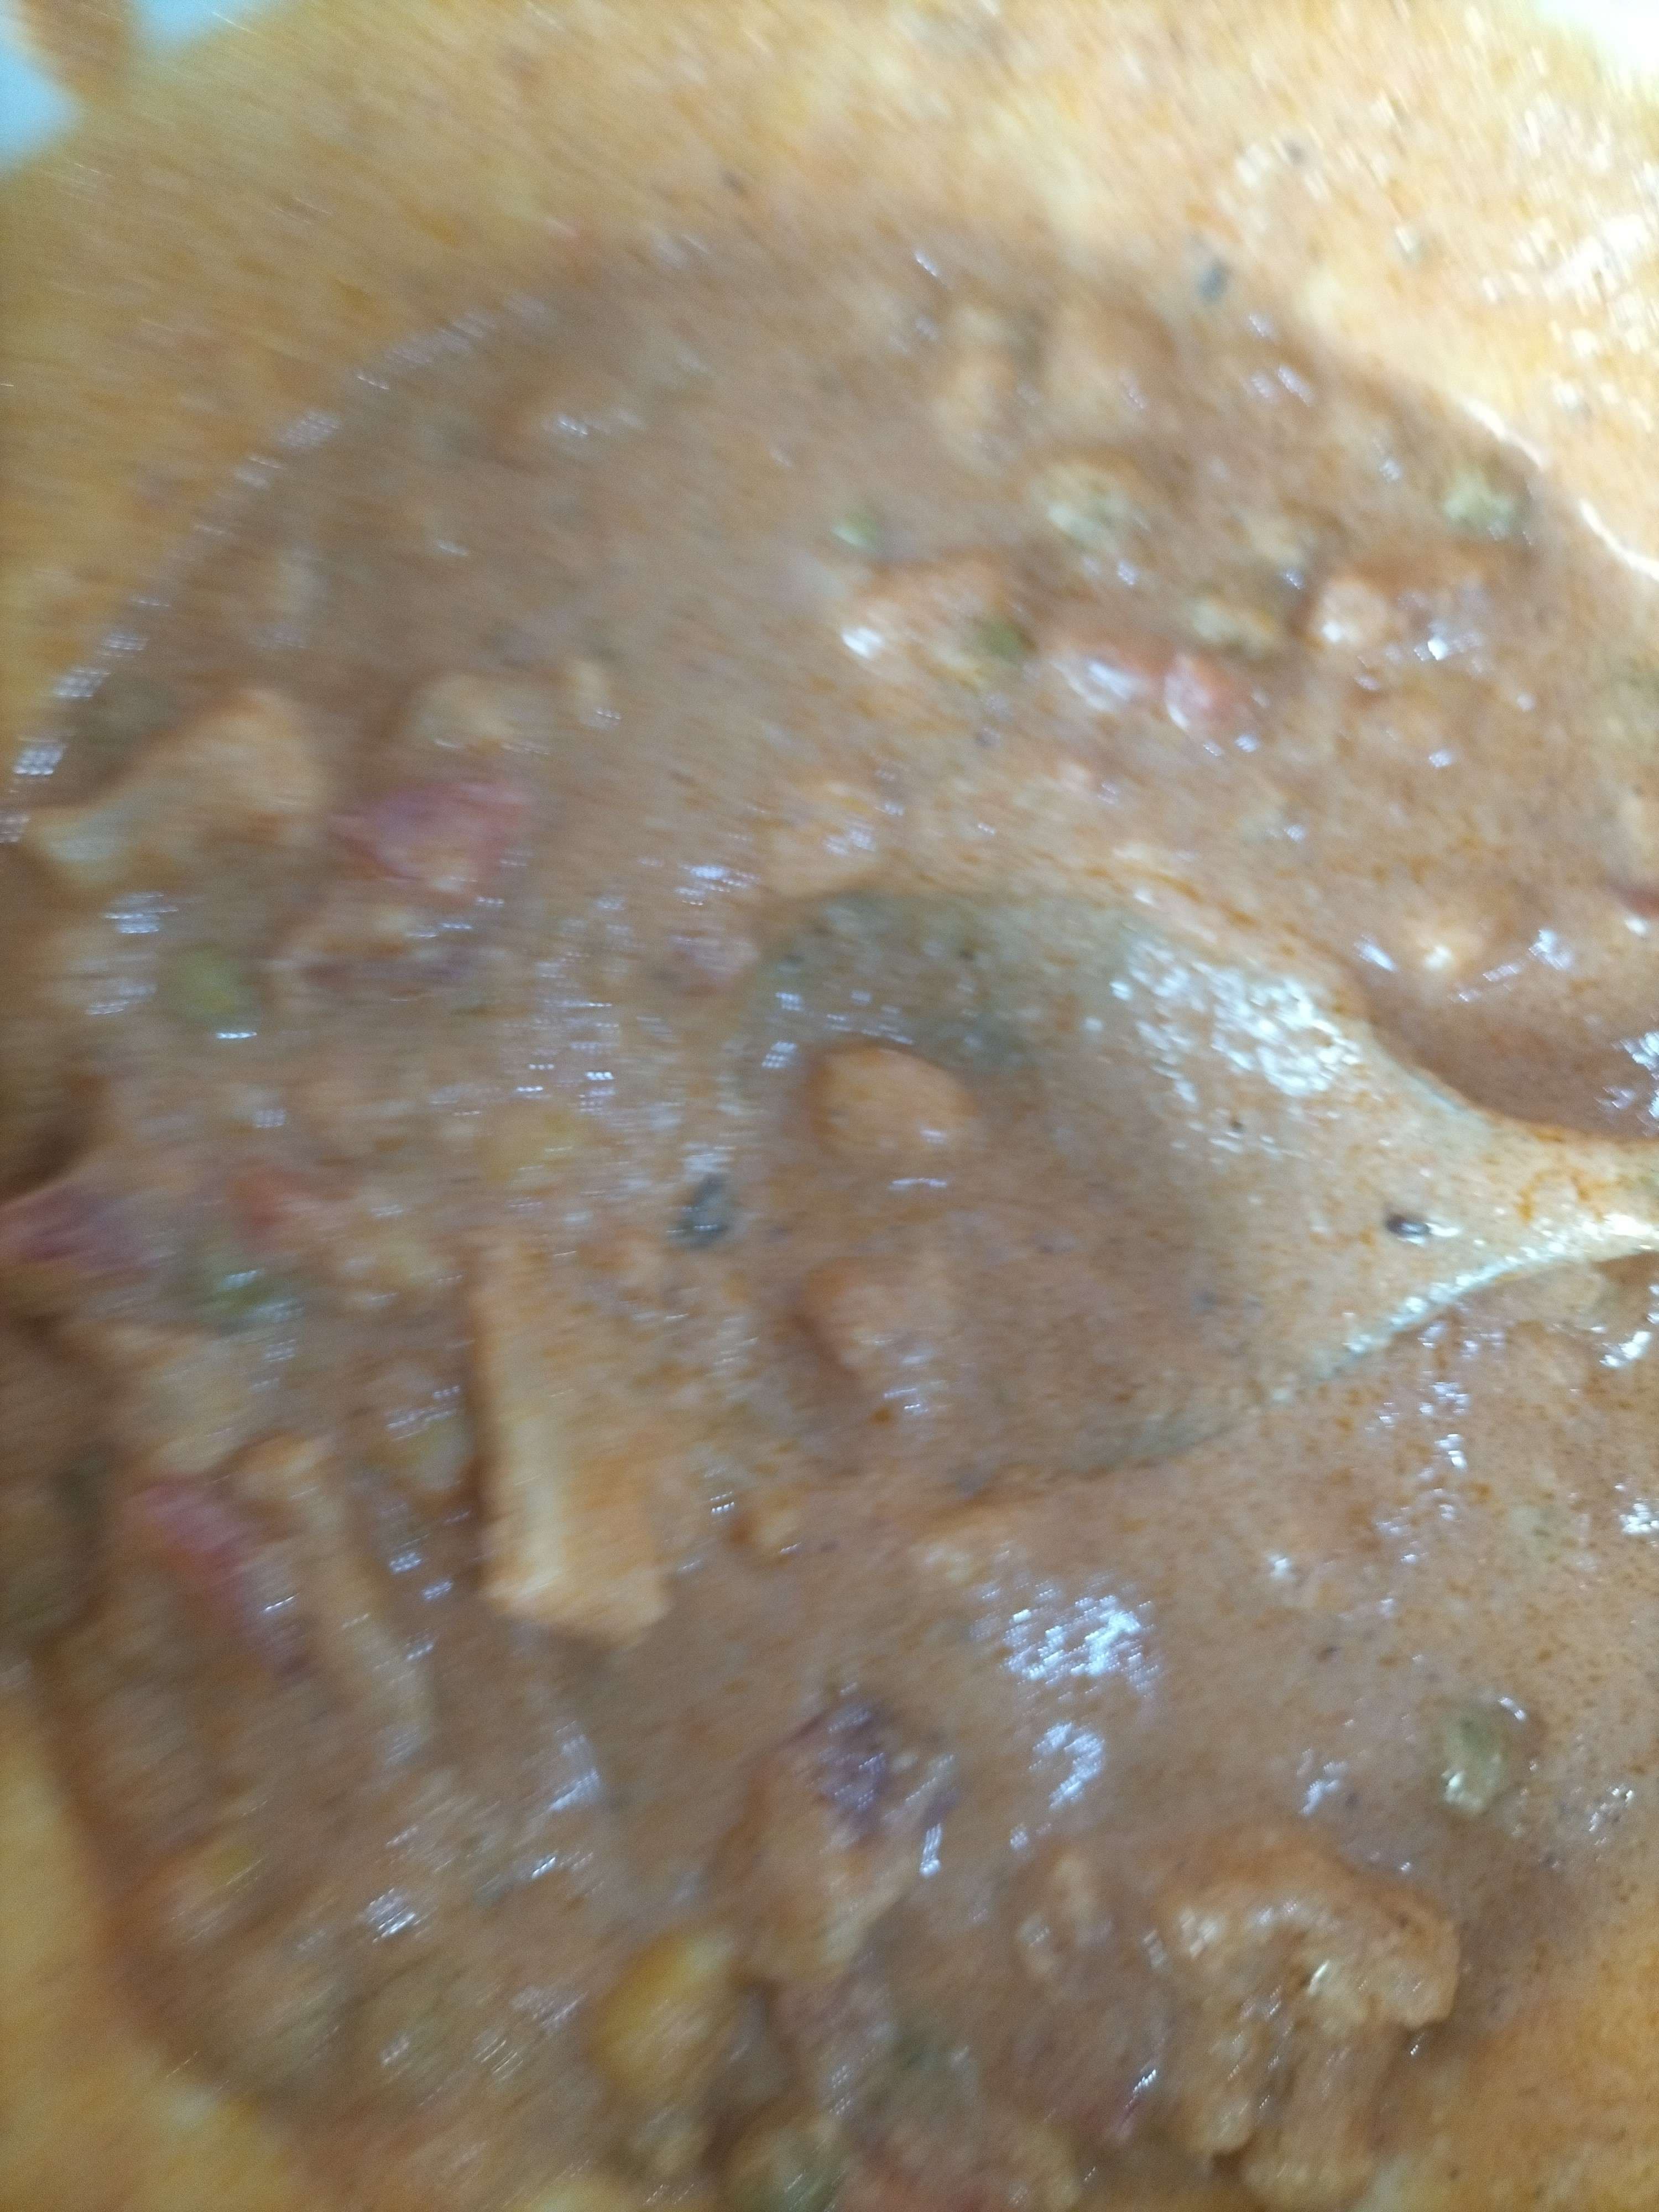 Tasty Veg Korma cooked by COOX chefs cooks during occasions parties events at home